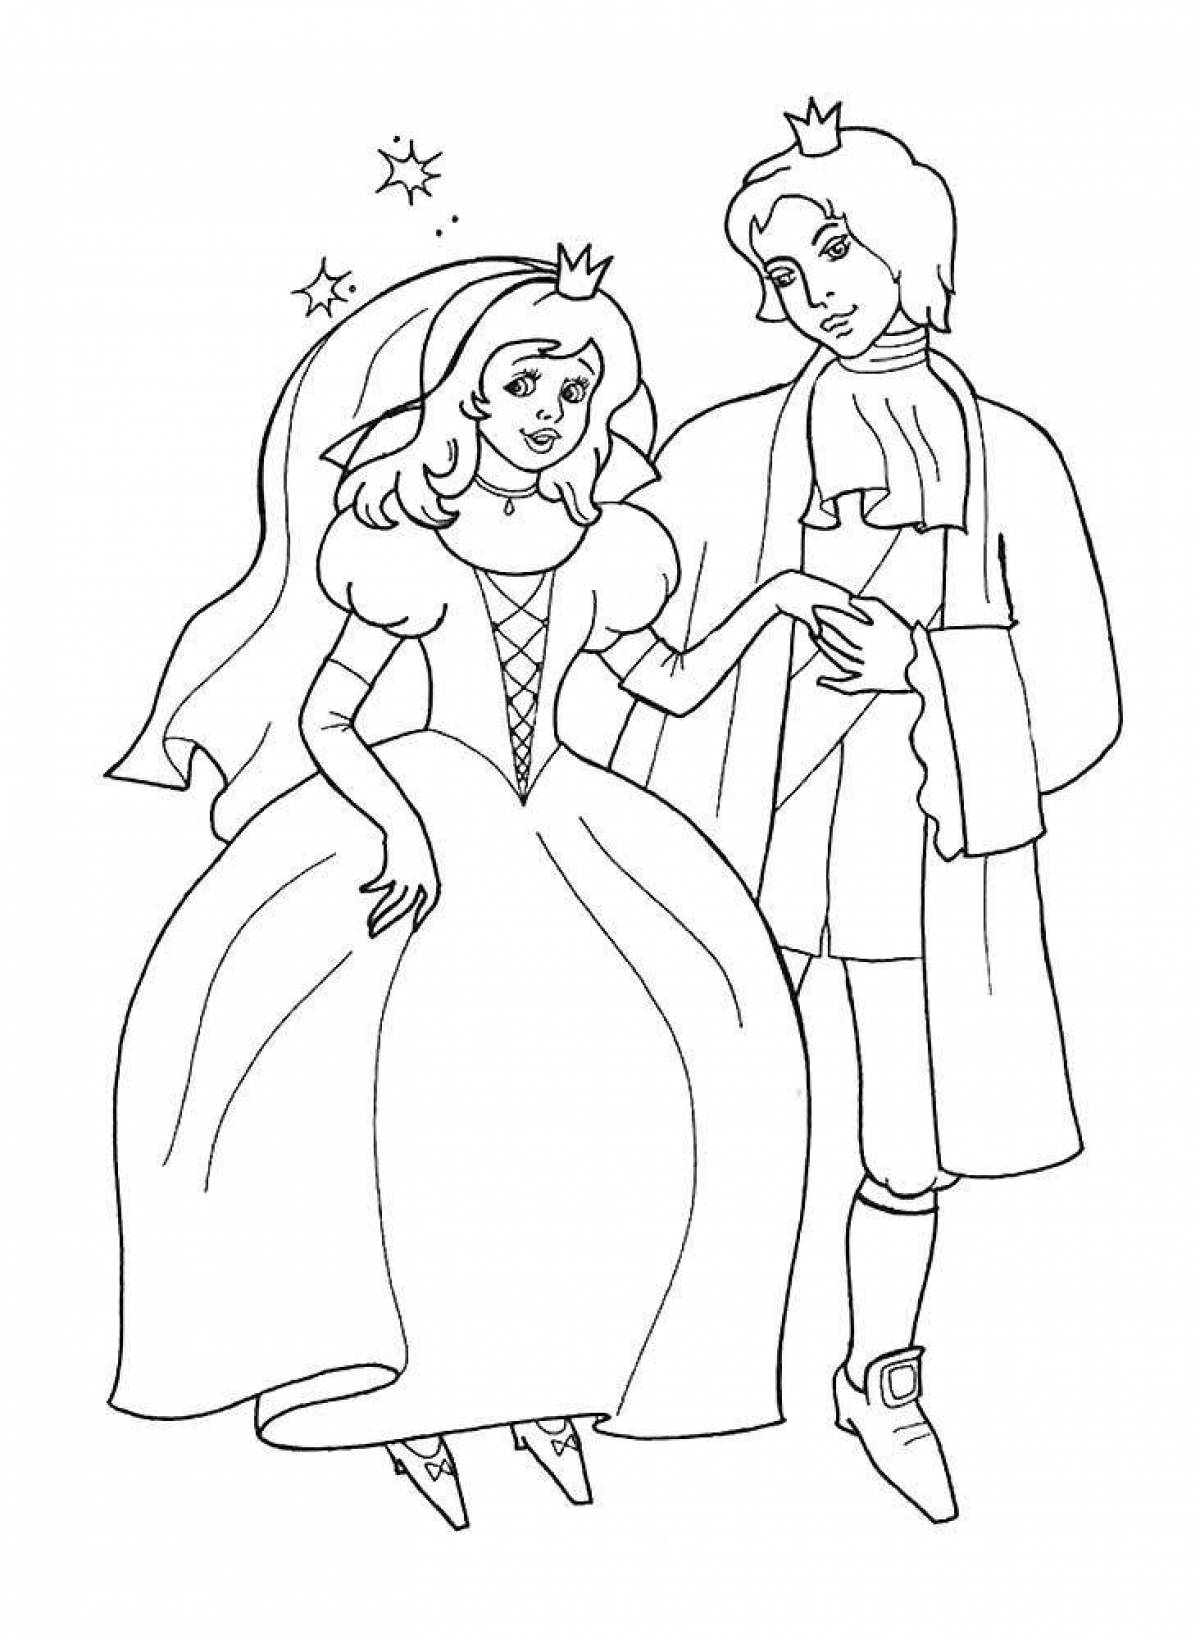 Gorgeous prince and princess coloring pages